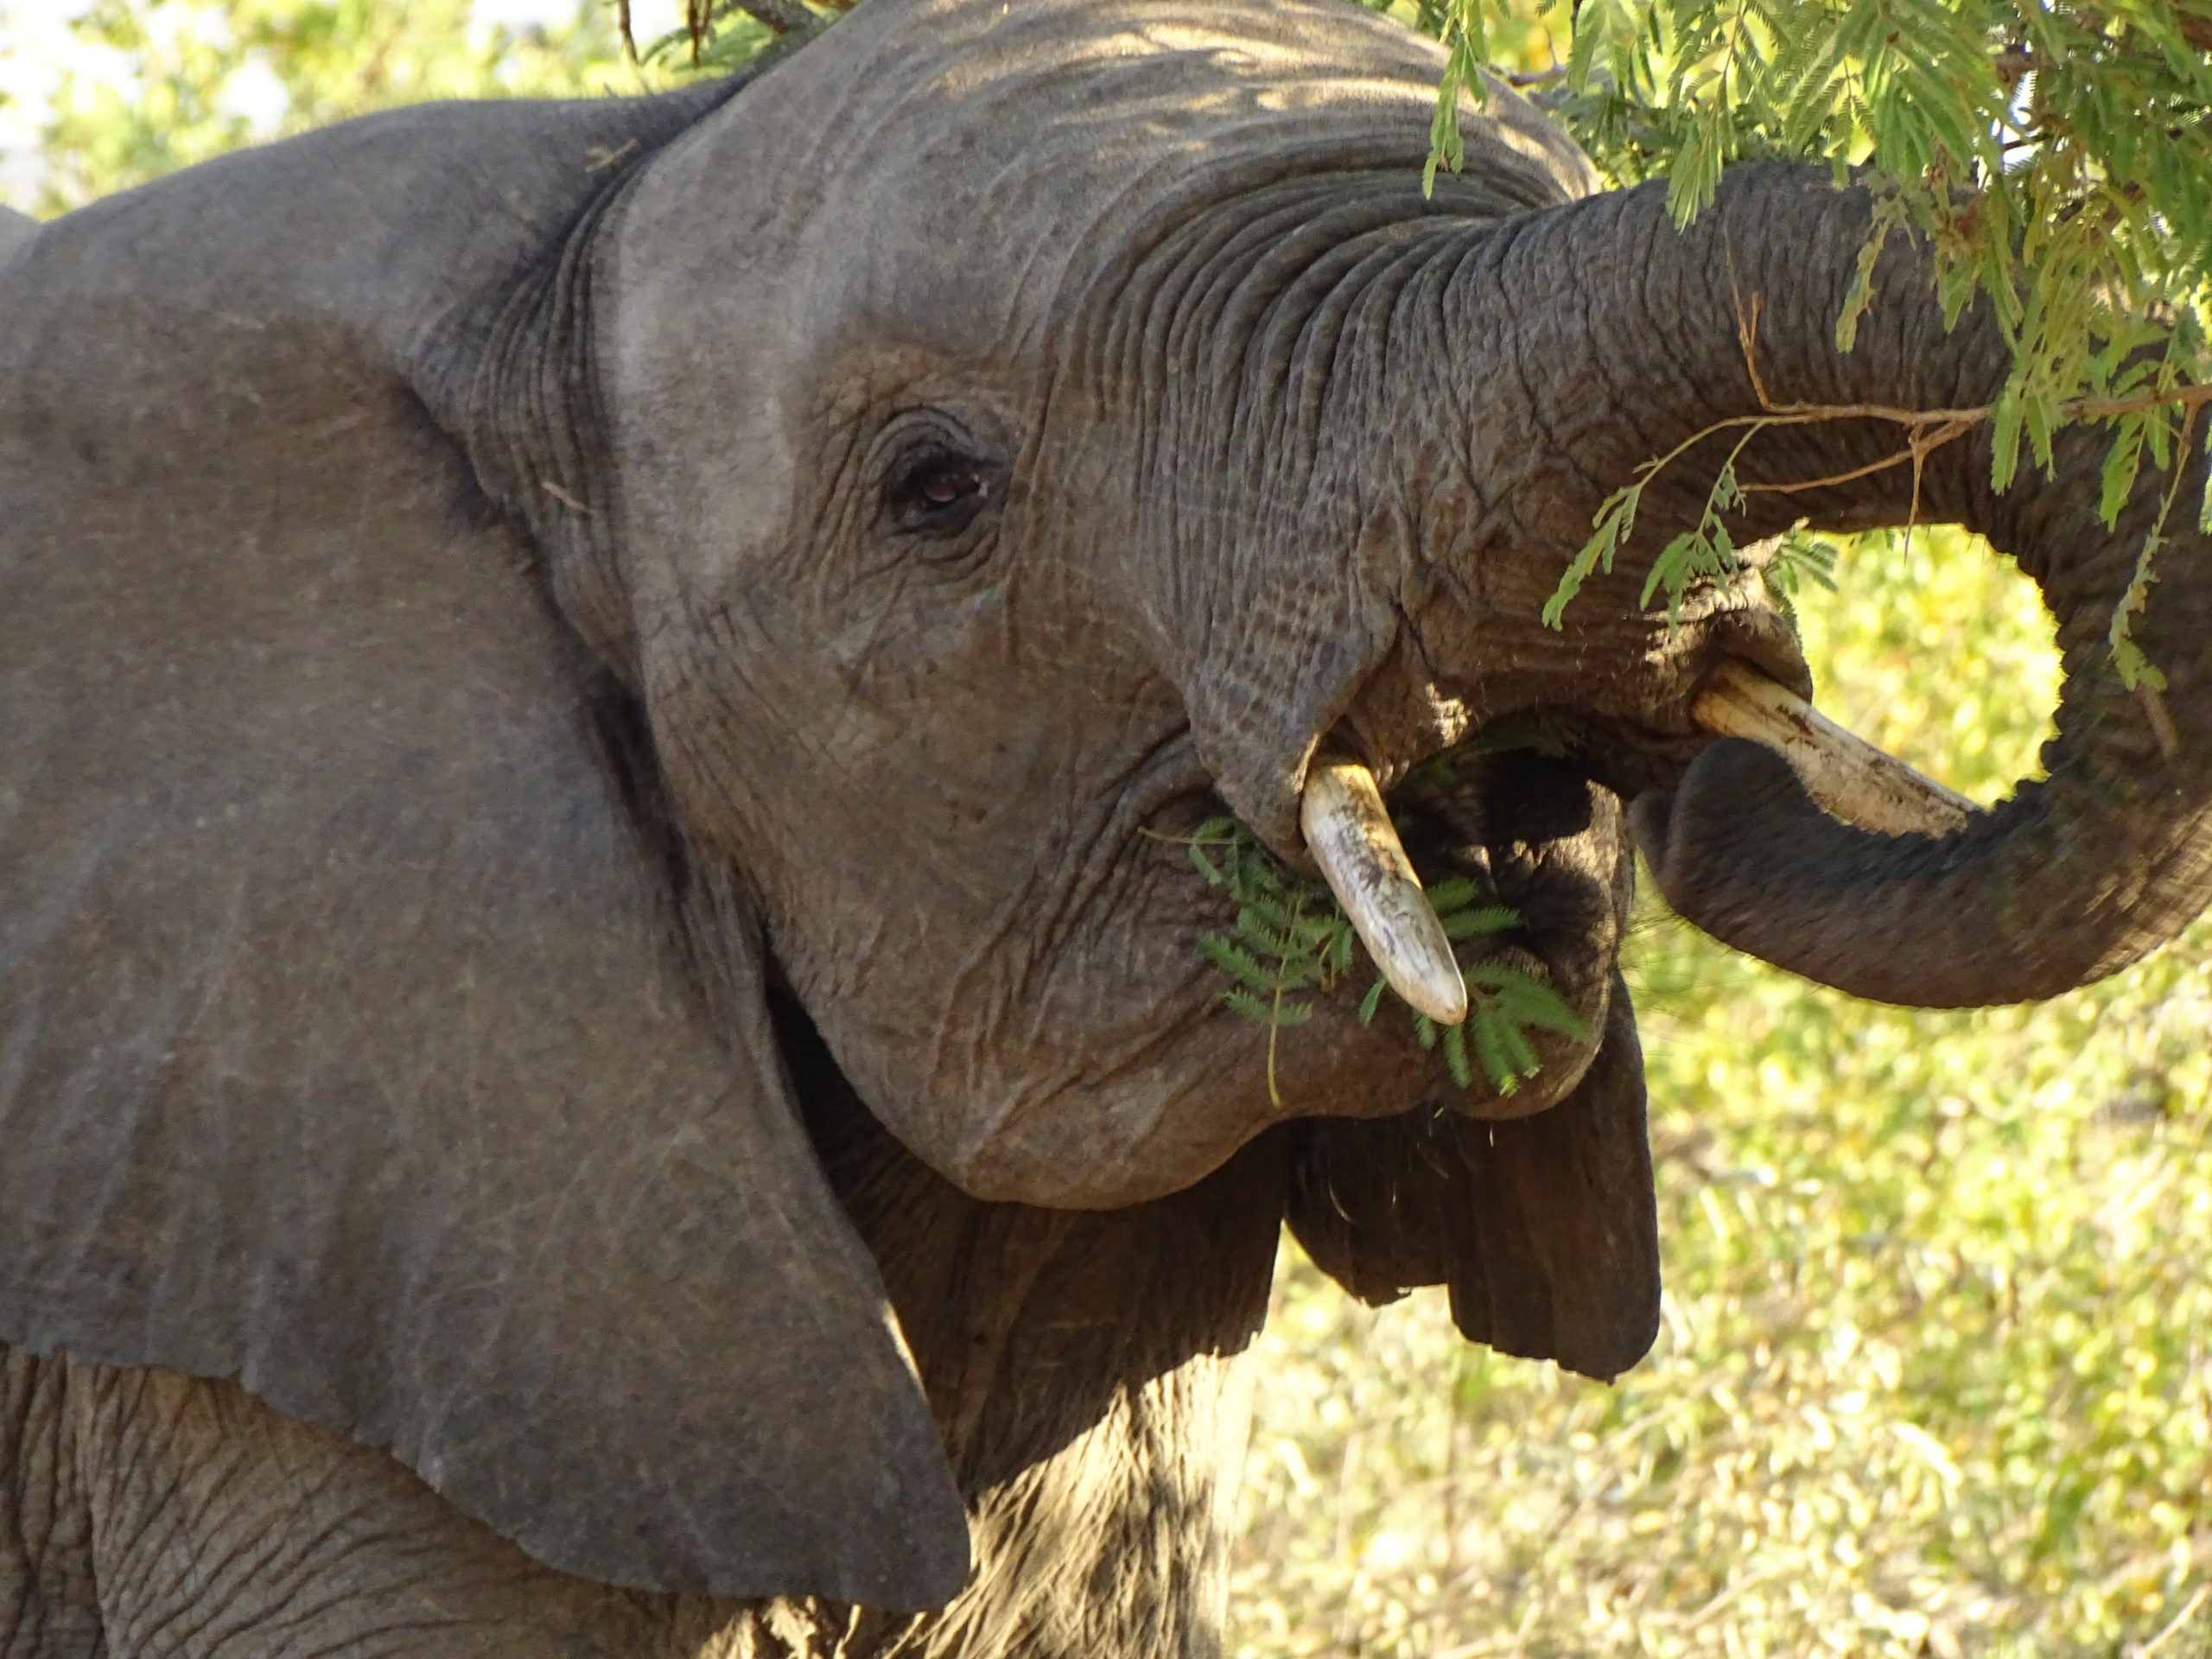 Baby elephant eating from the tree